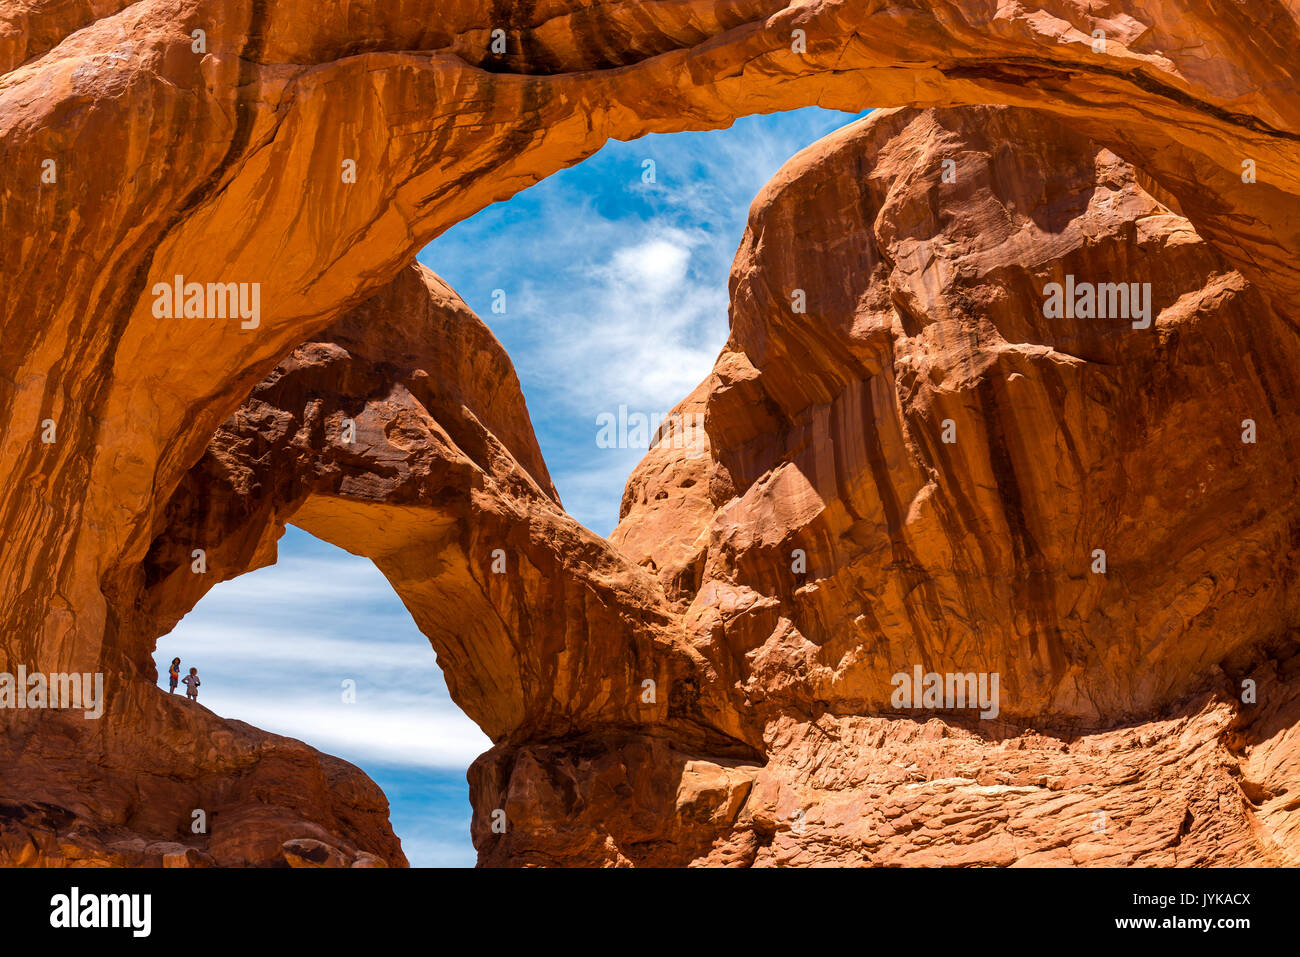 Two people under the Double Arch inside Arches National Park near Moab, Utah, USA. Stock Photo